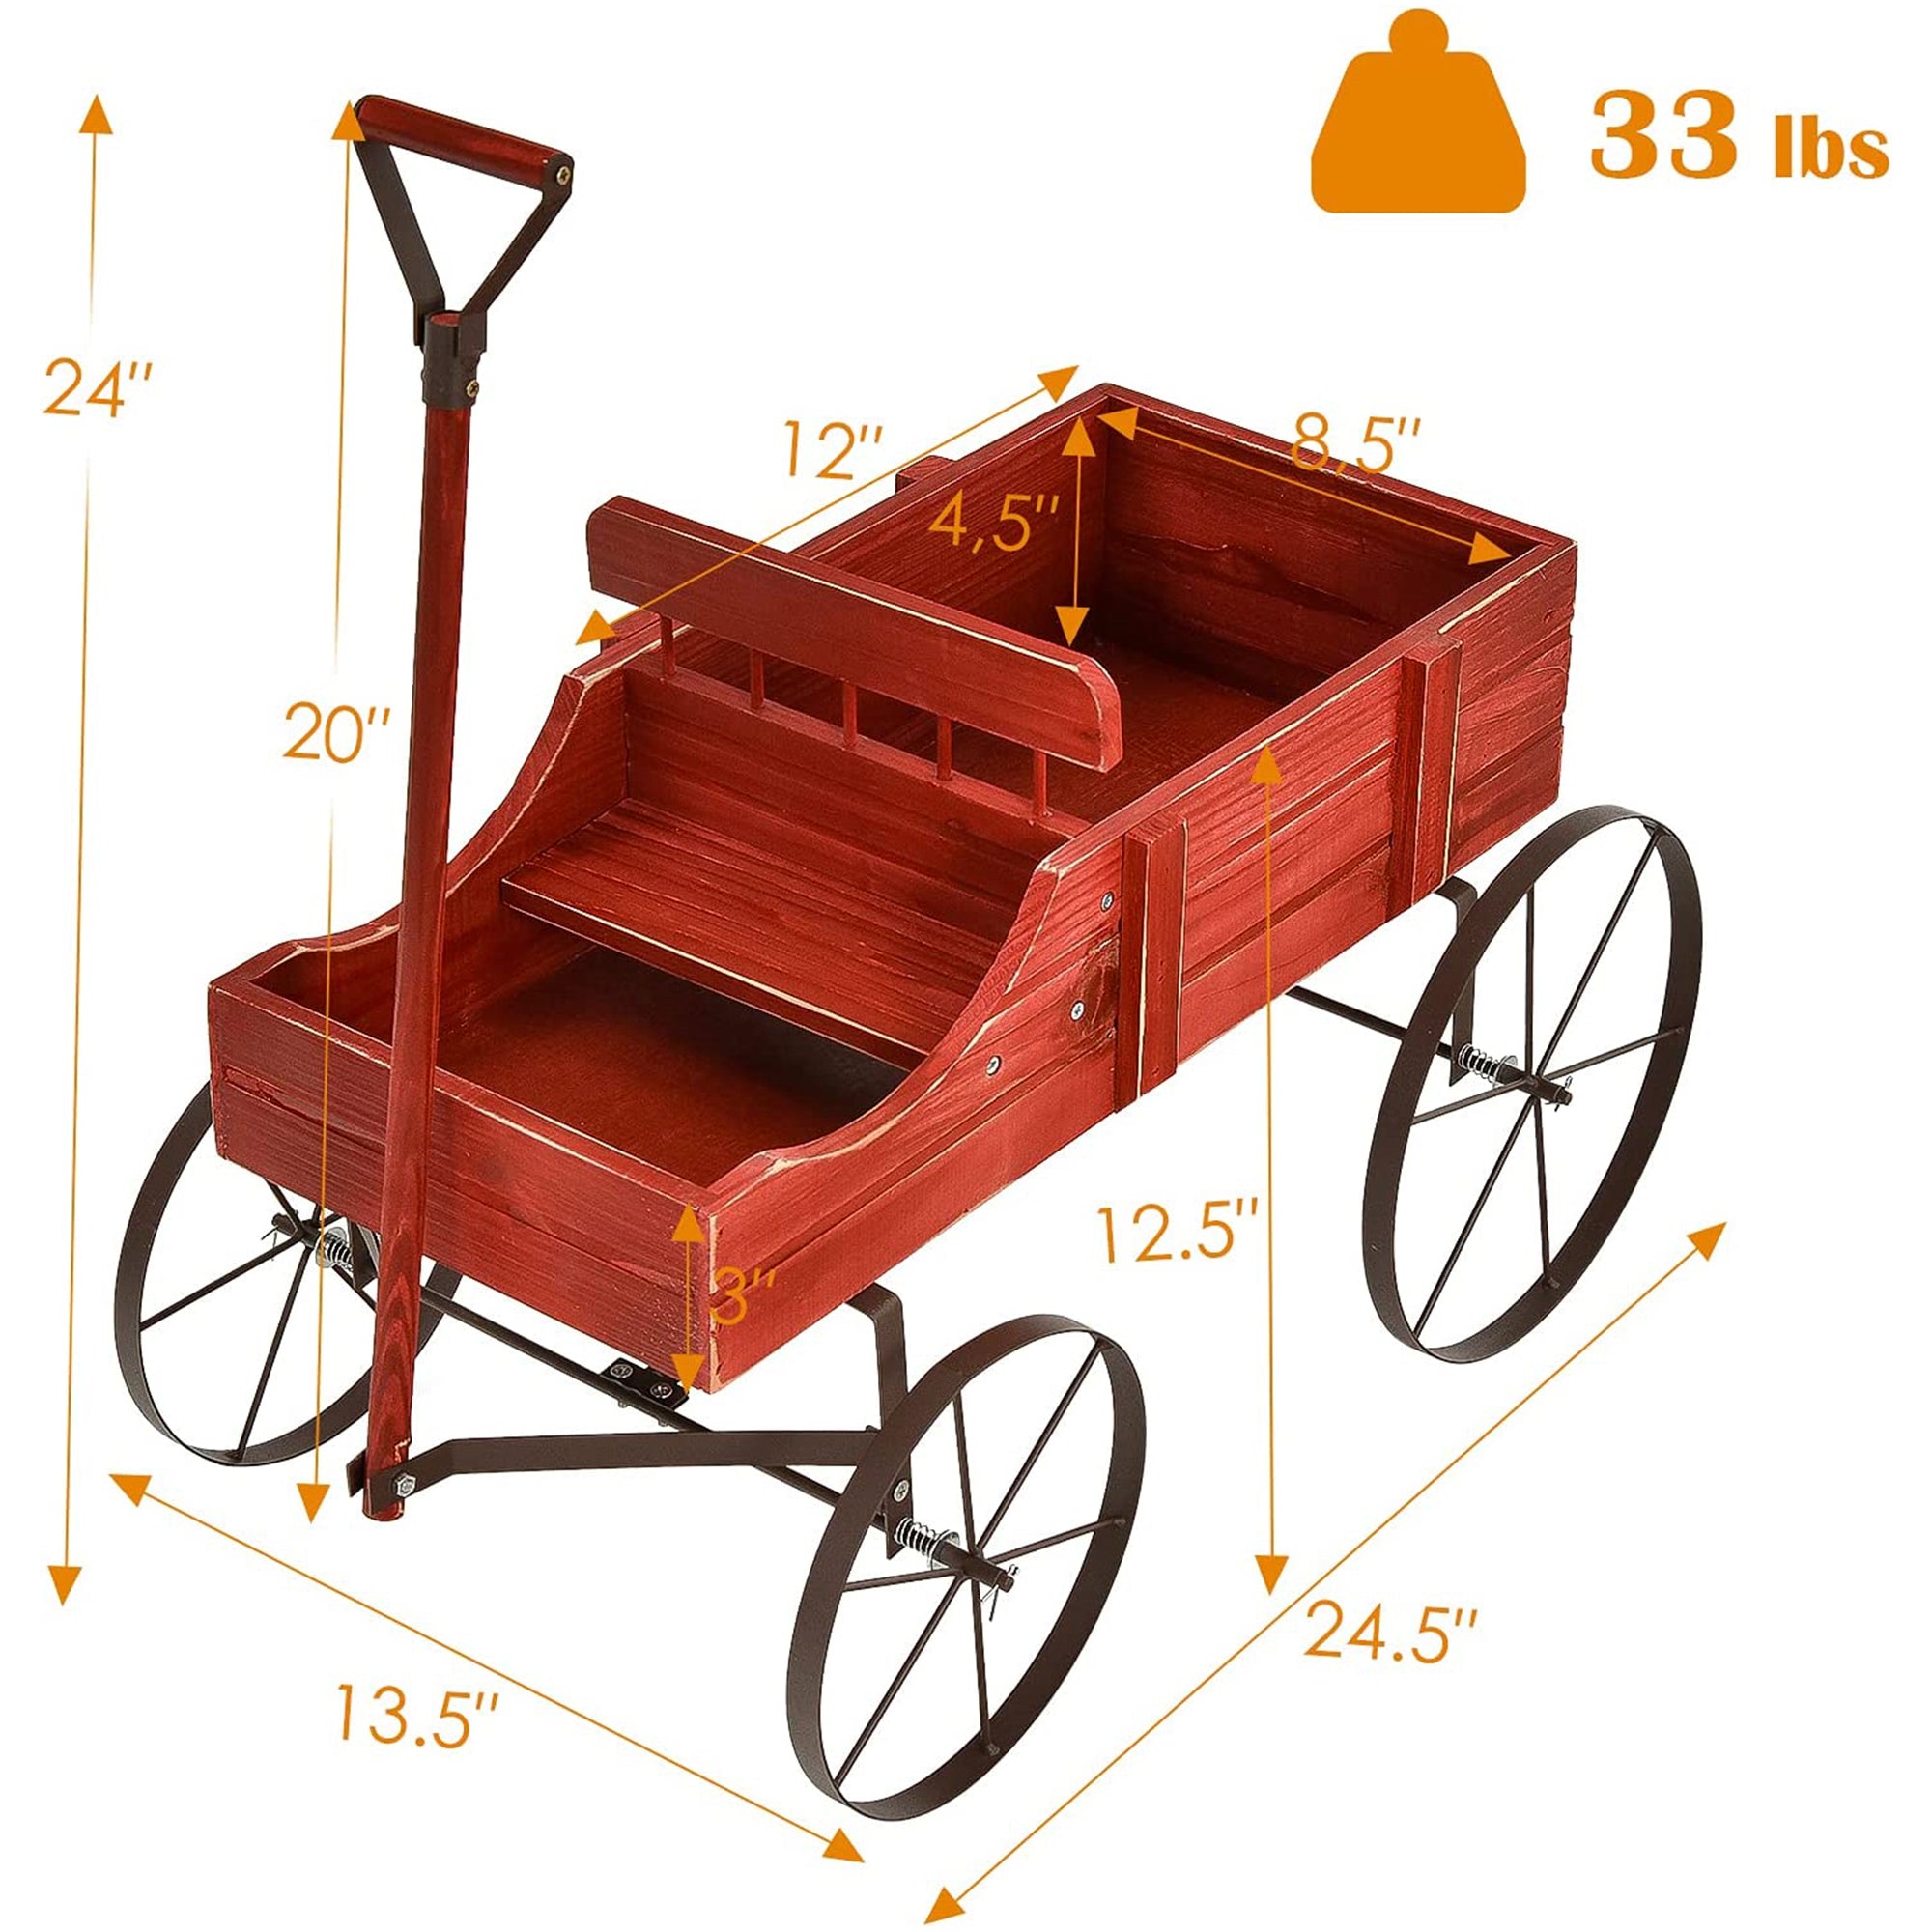 Wooden Wagon Plant Bed in Red with Metal Wheels